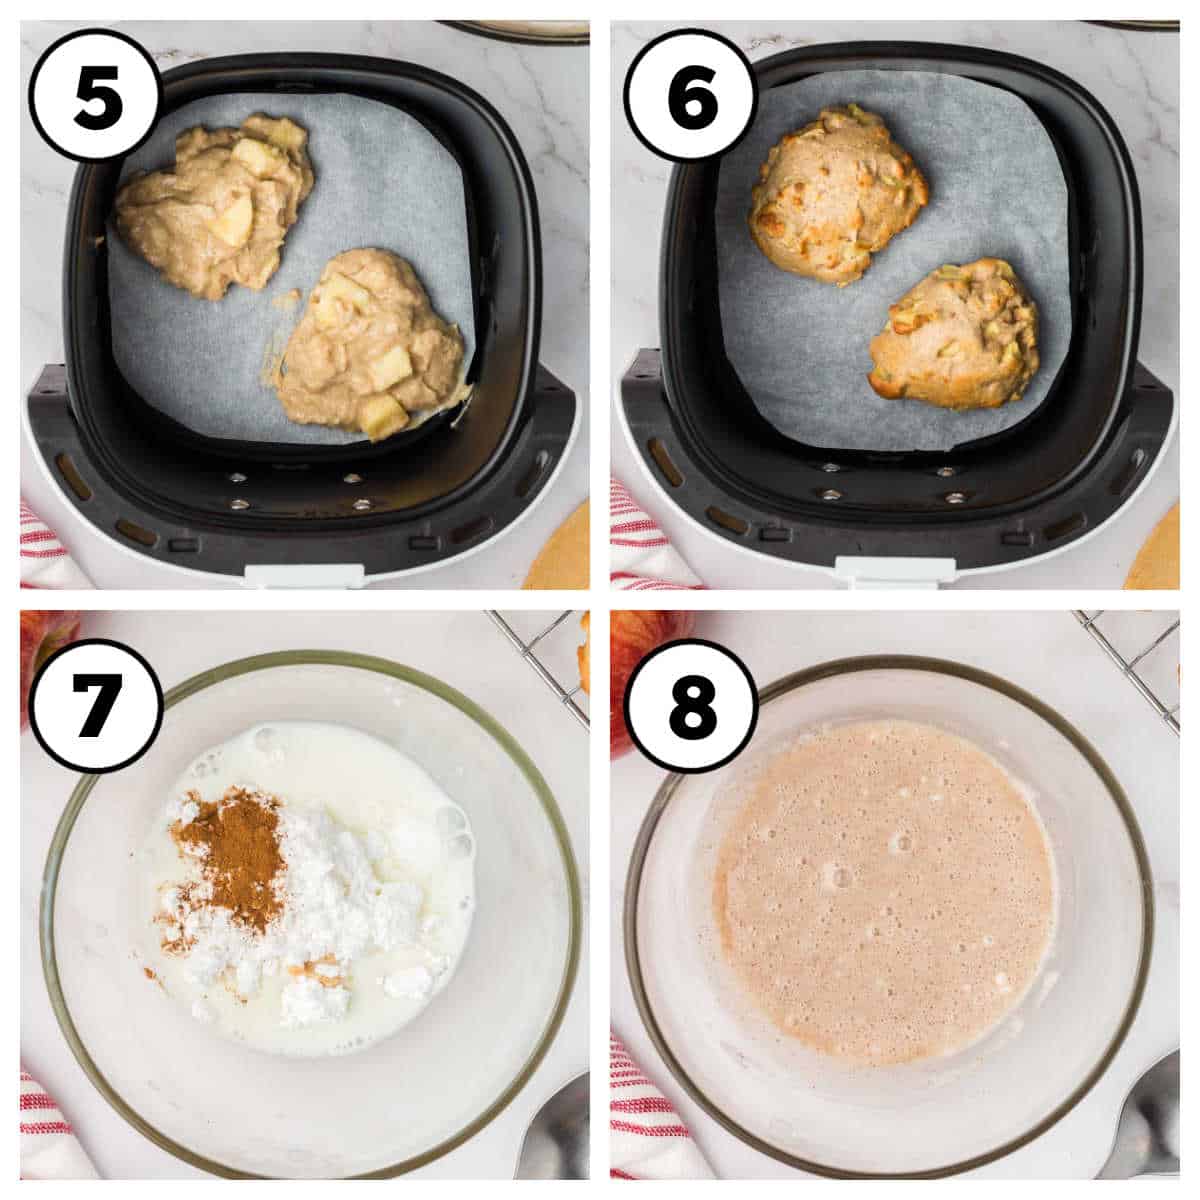 Steps 5-8 on how to make air fryer apple fritters.